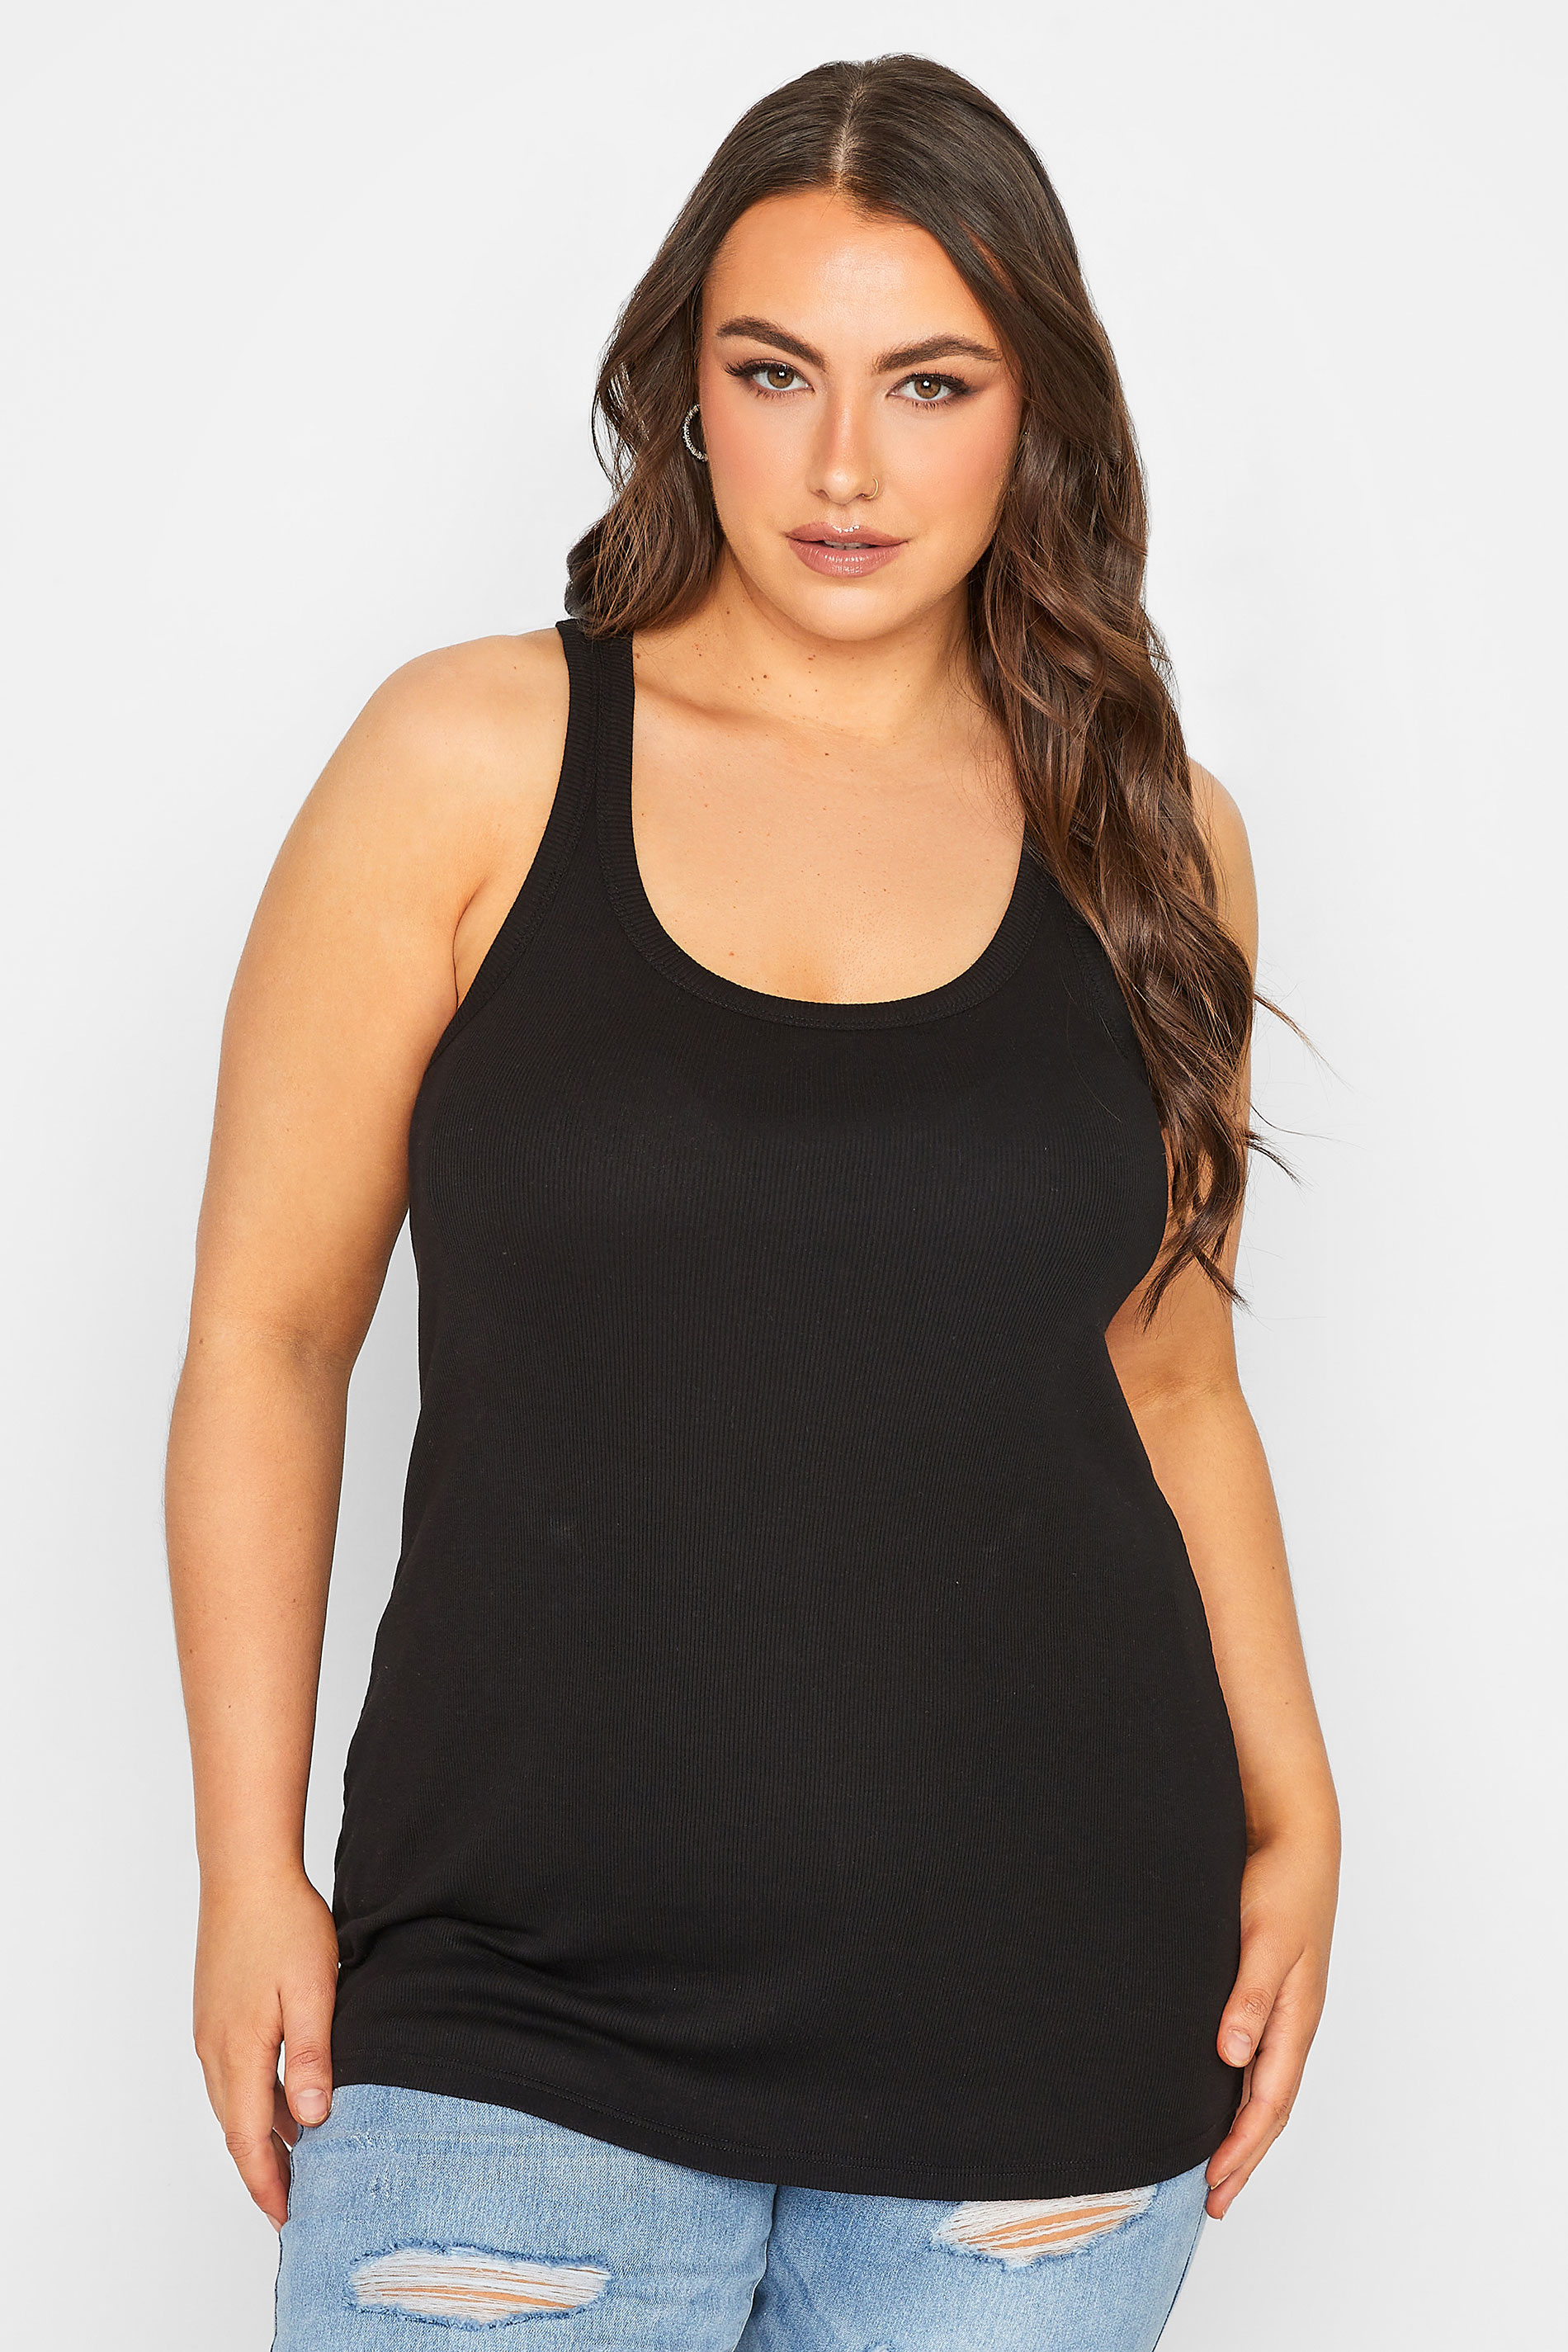 YOURS Plus Size 2 PACK Black & White Racer Vest Tops | Yours Clothing  2